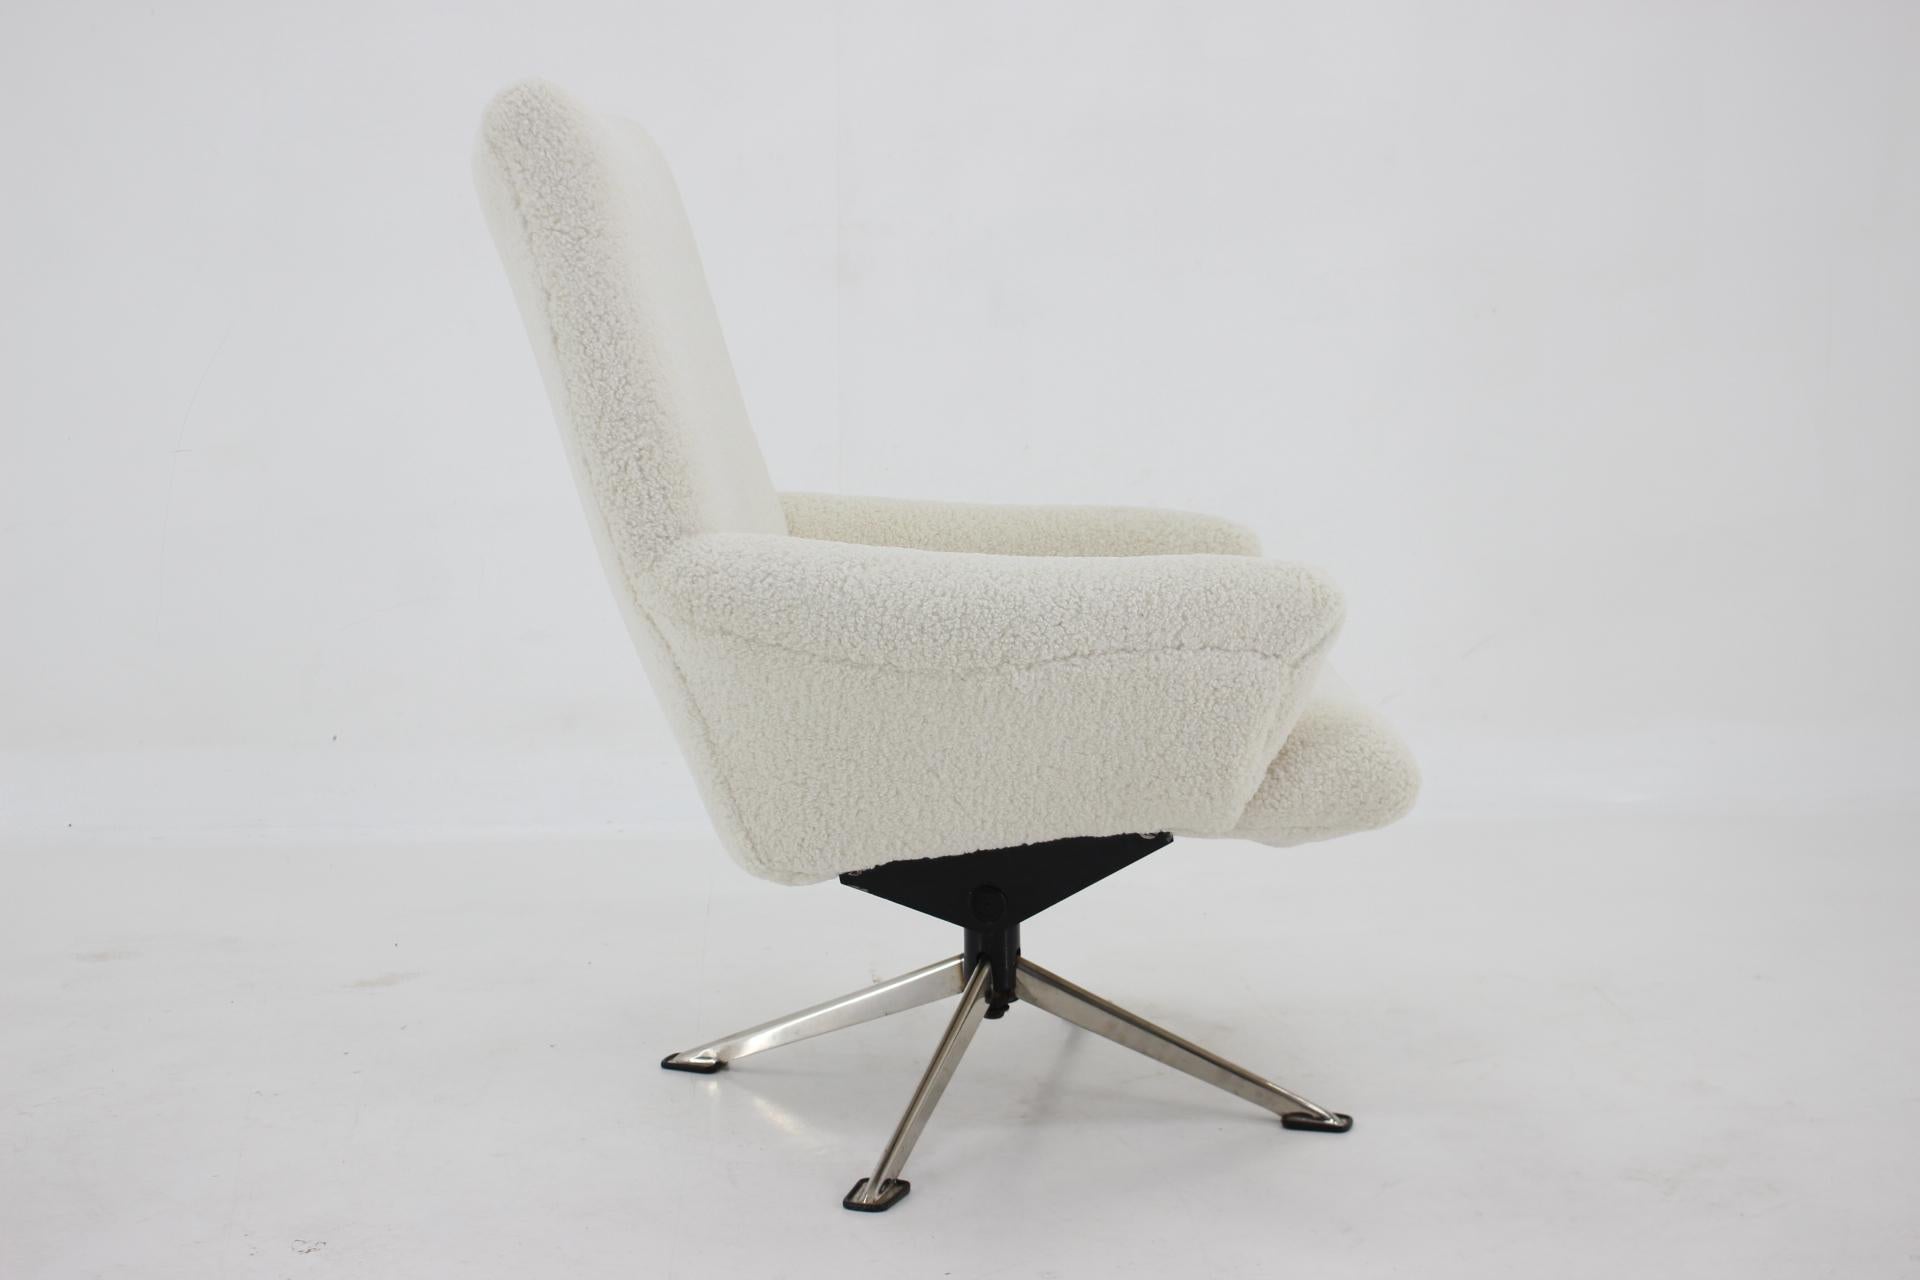 - Newly upholstered with quality synthetic fabric imitating sheepskin 
- Swivel base in good/sturdy condition
- Height of seat 37 cm.